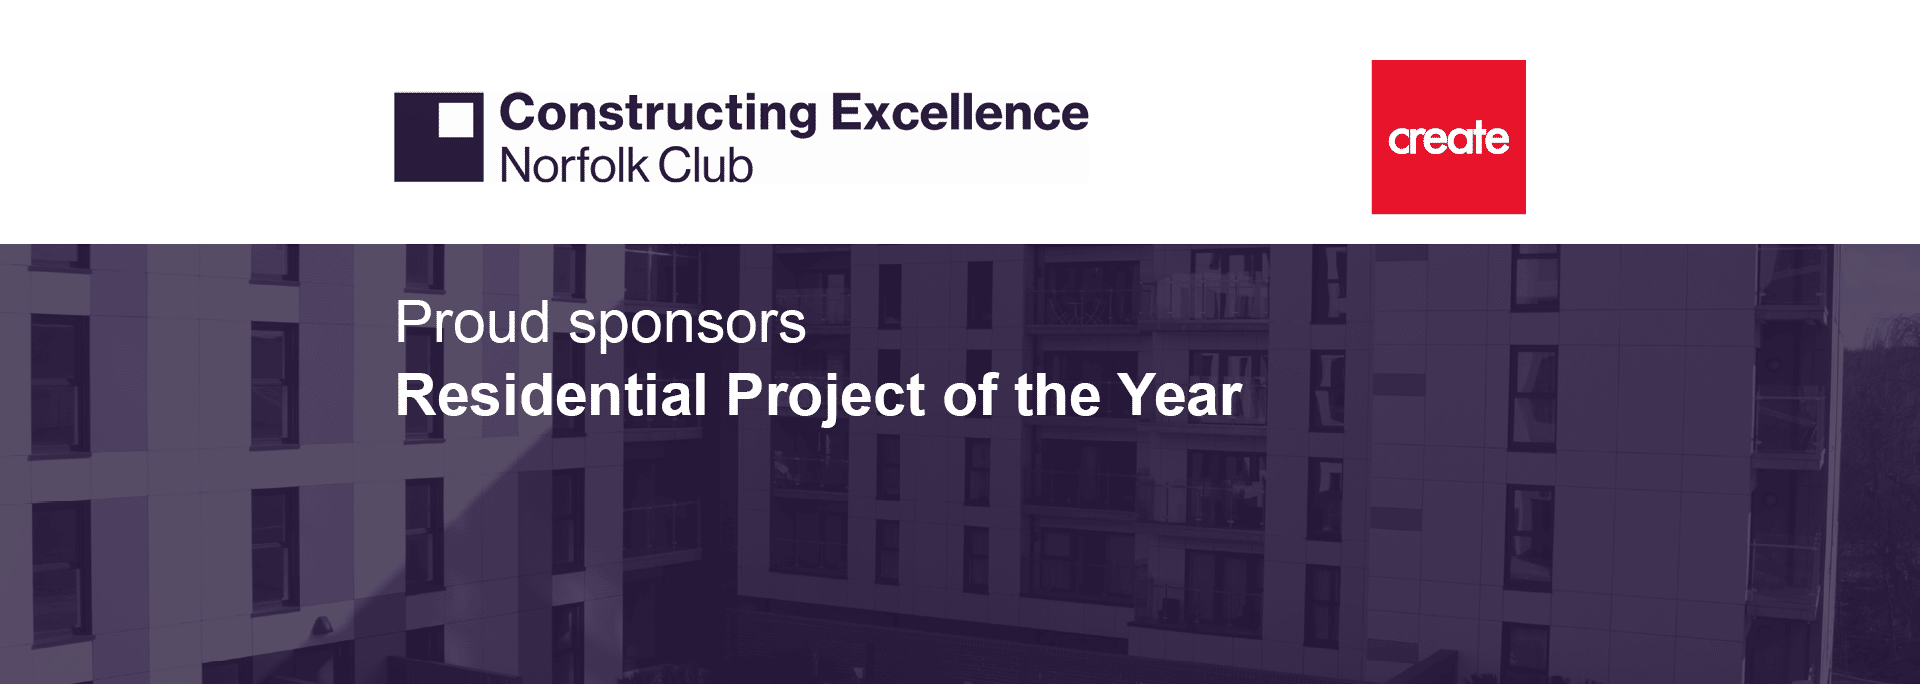 Image showing Create as proud sponsors of the Residential Project of the Year